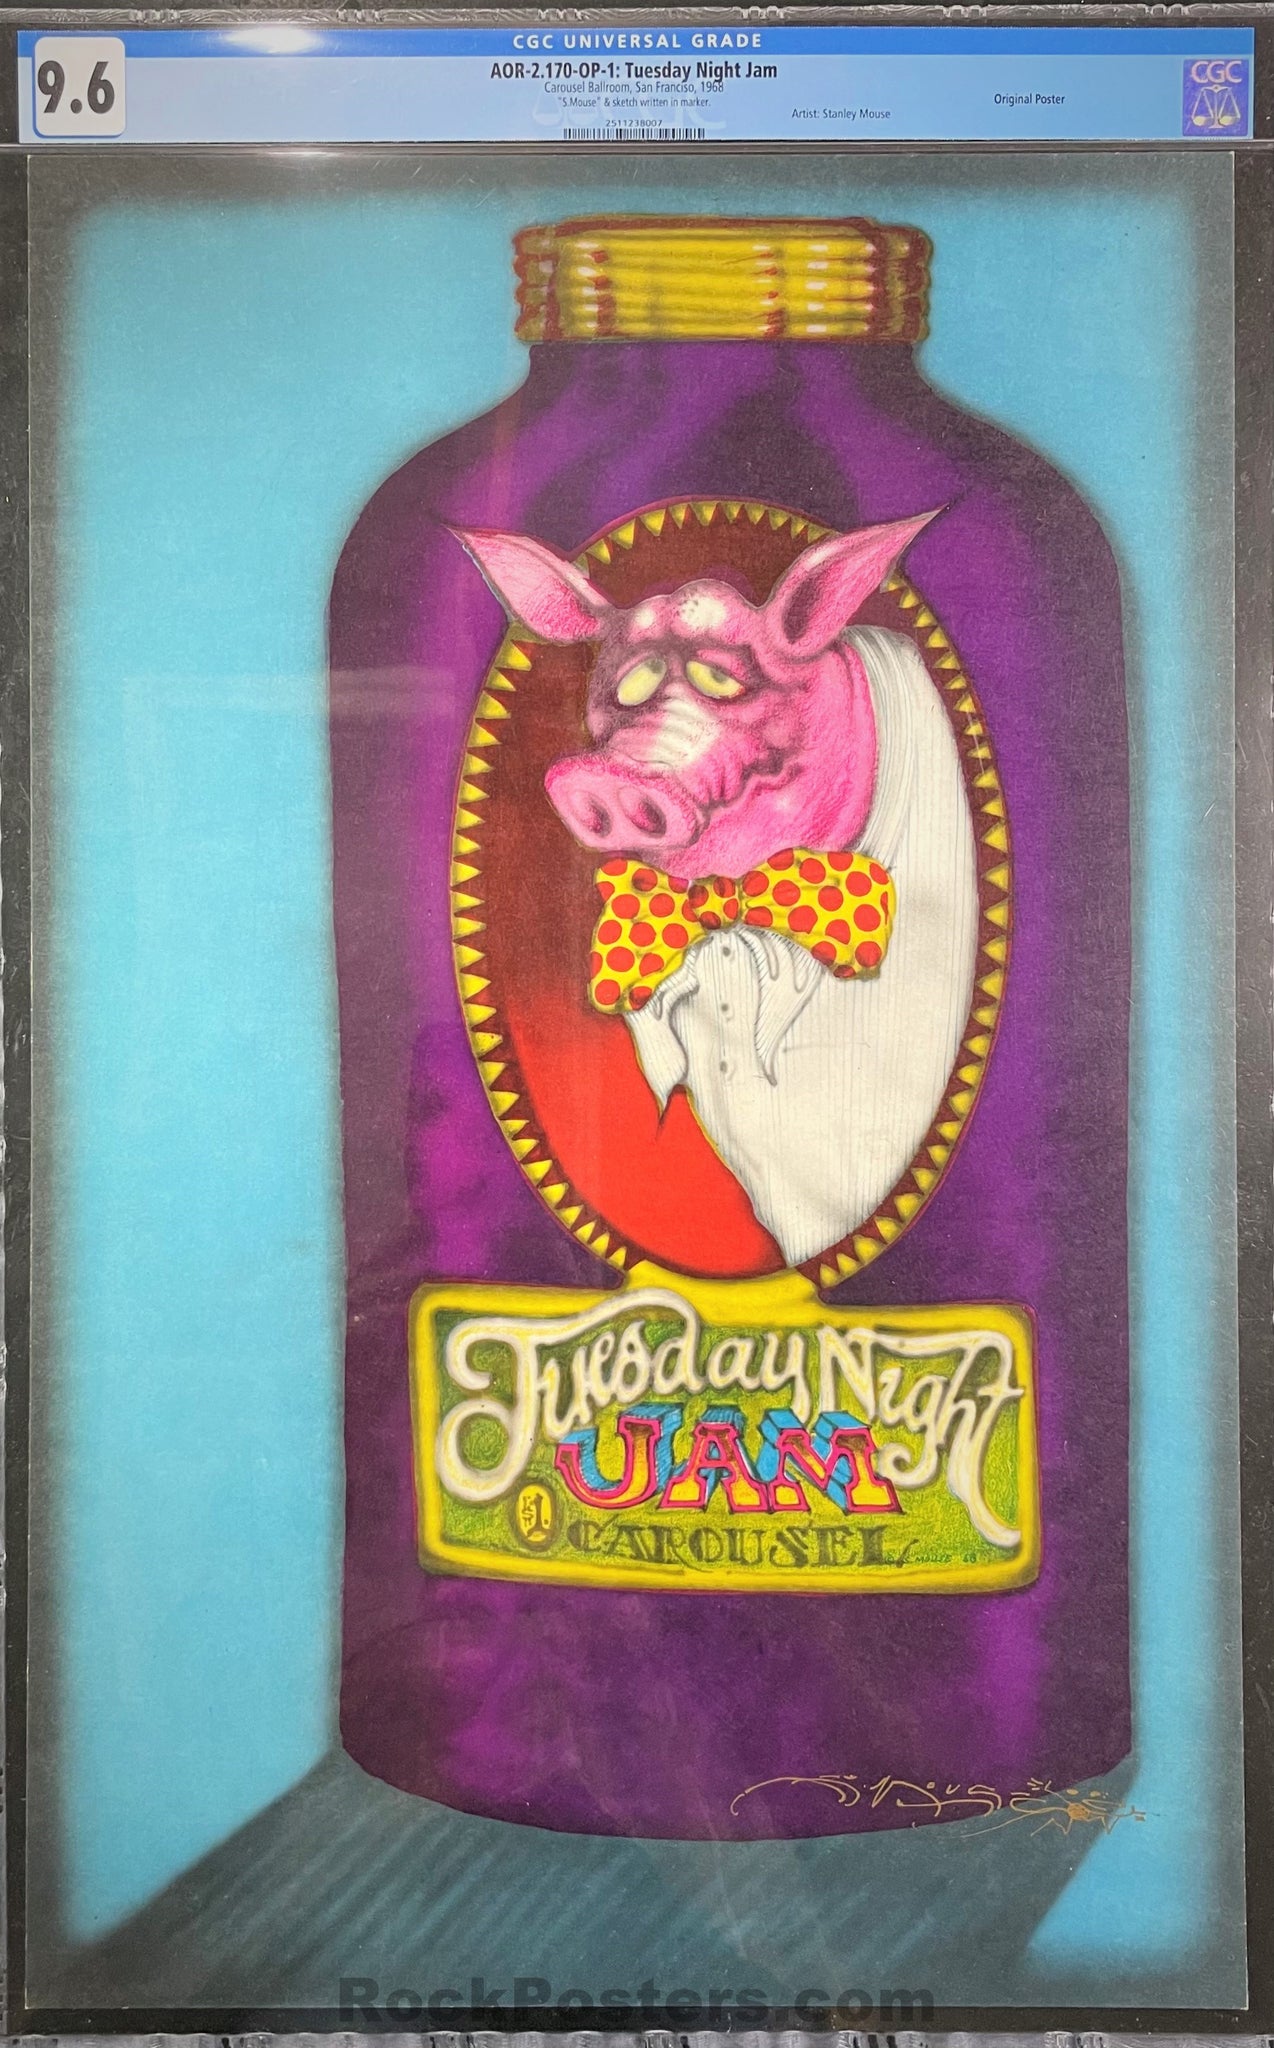 AUCTION - AOR-2.170 - Tuesday Night Jam - Mouse SIGNED - 1968 Poster - Carousel Ballroom - CGC Graded 9.6